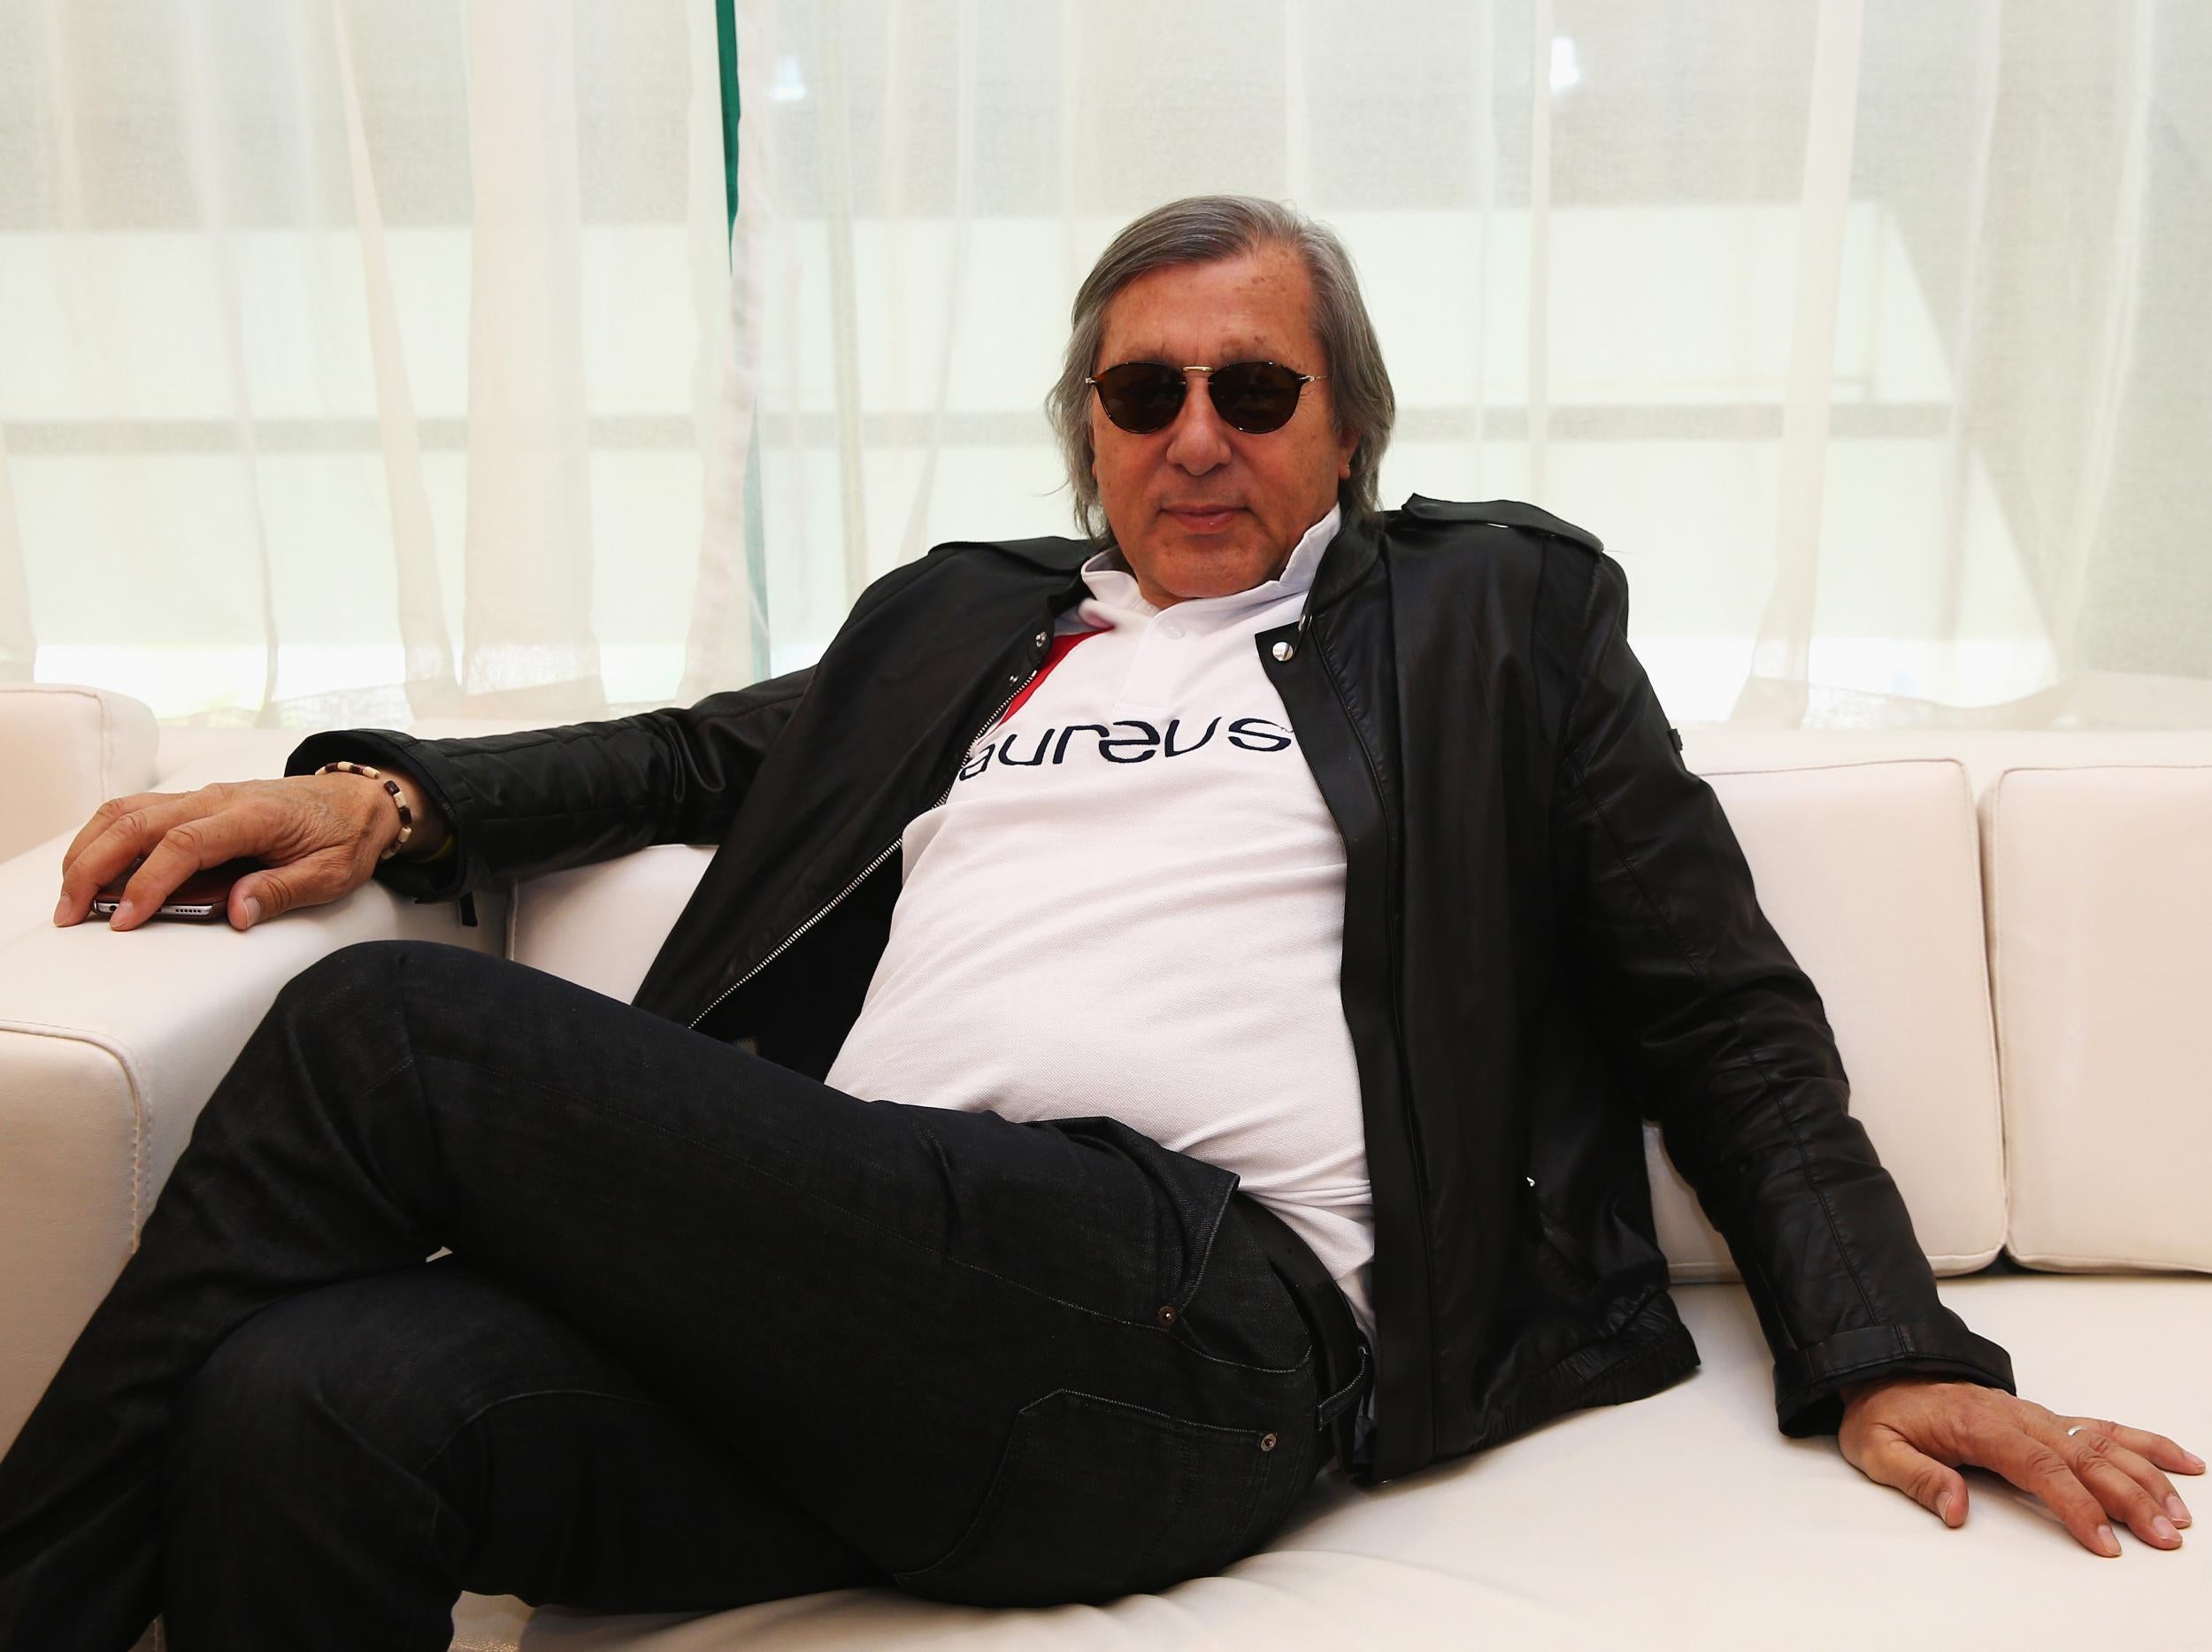 Nastase is now facing a divorce from his fourth wife